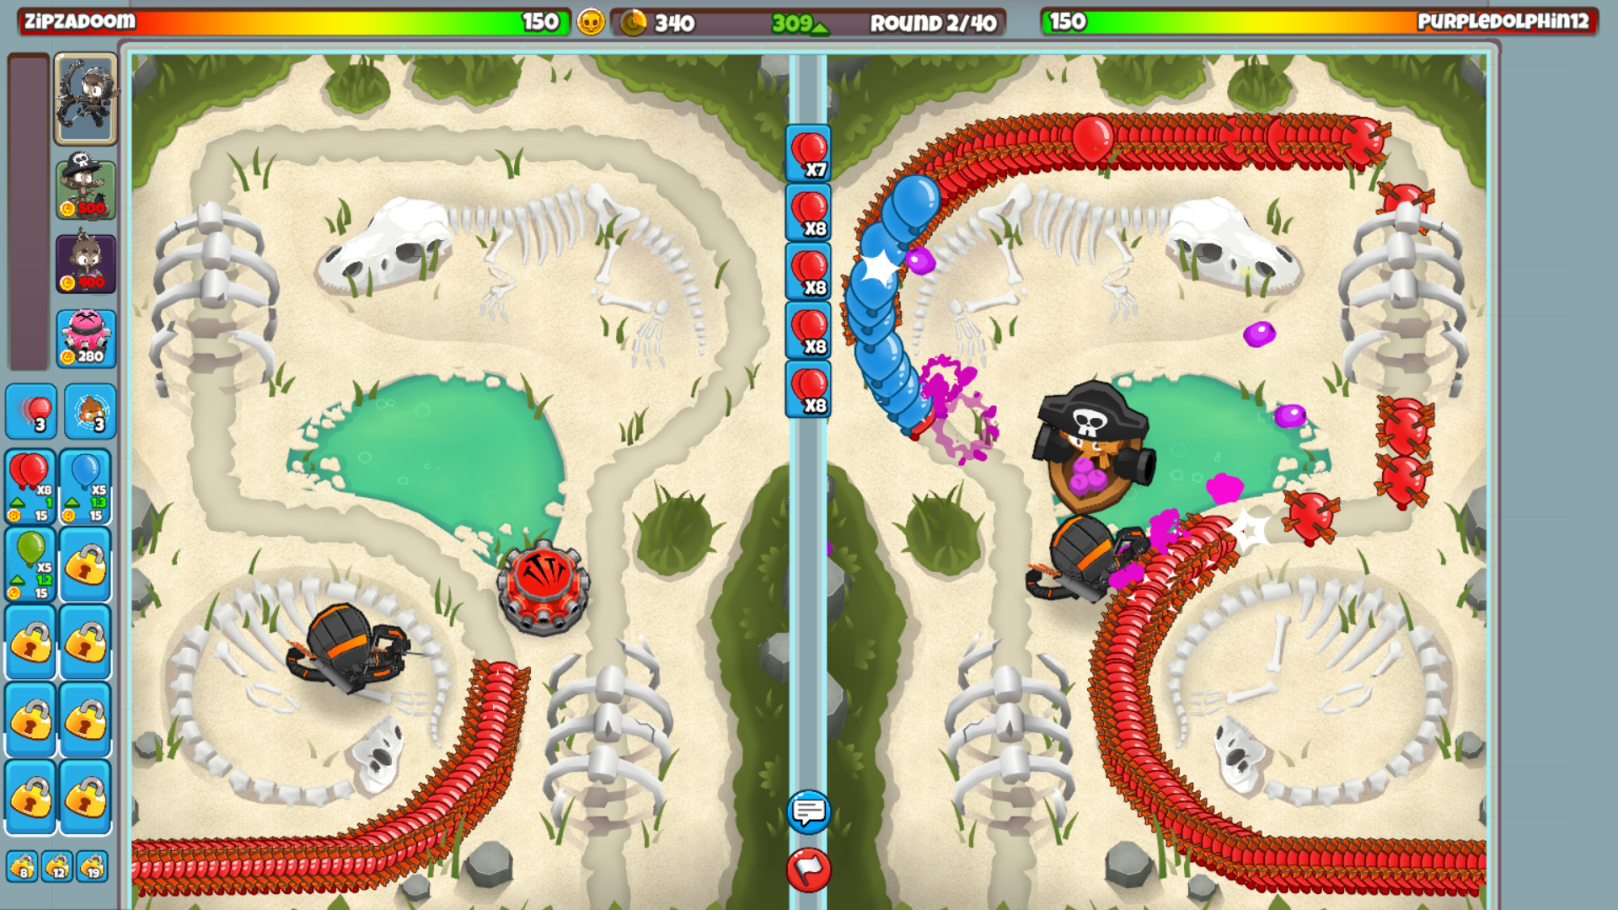 Bloons TD Battles 2: Beginner's Guide - Tips for New Players